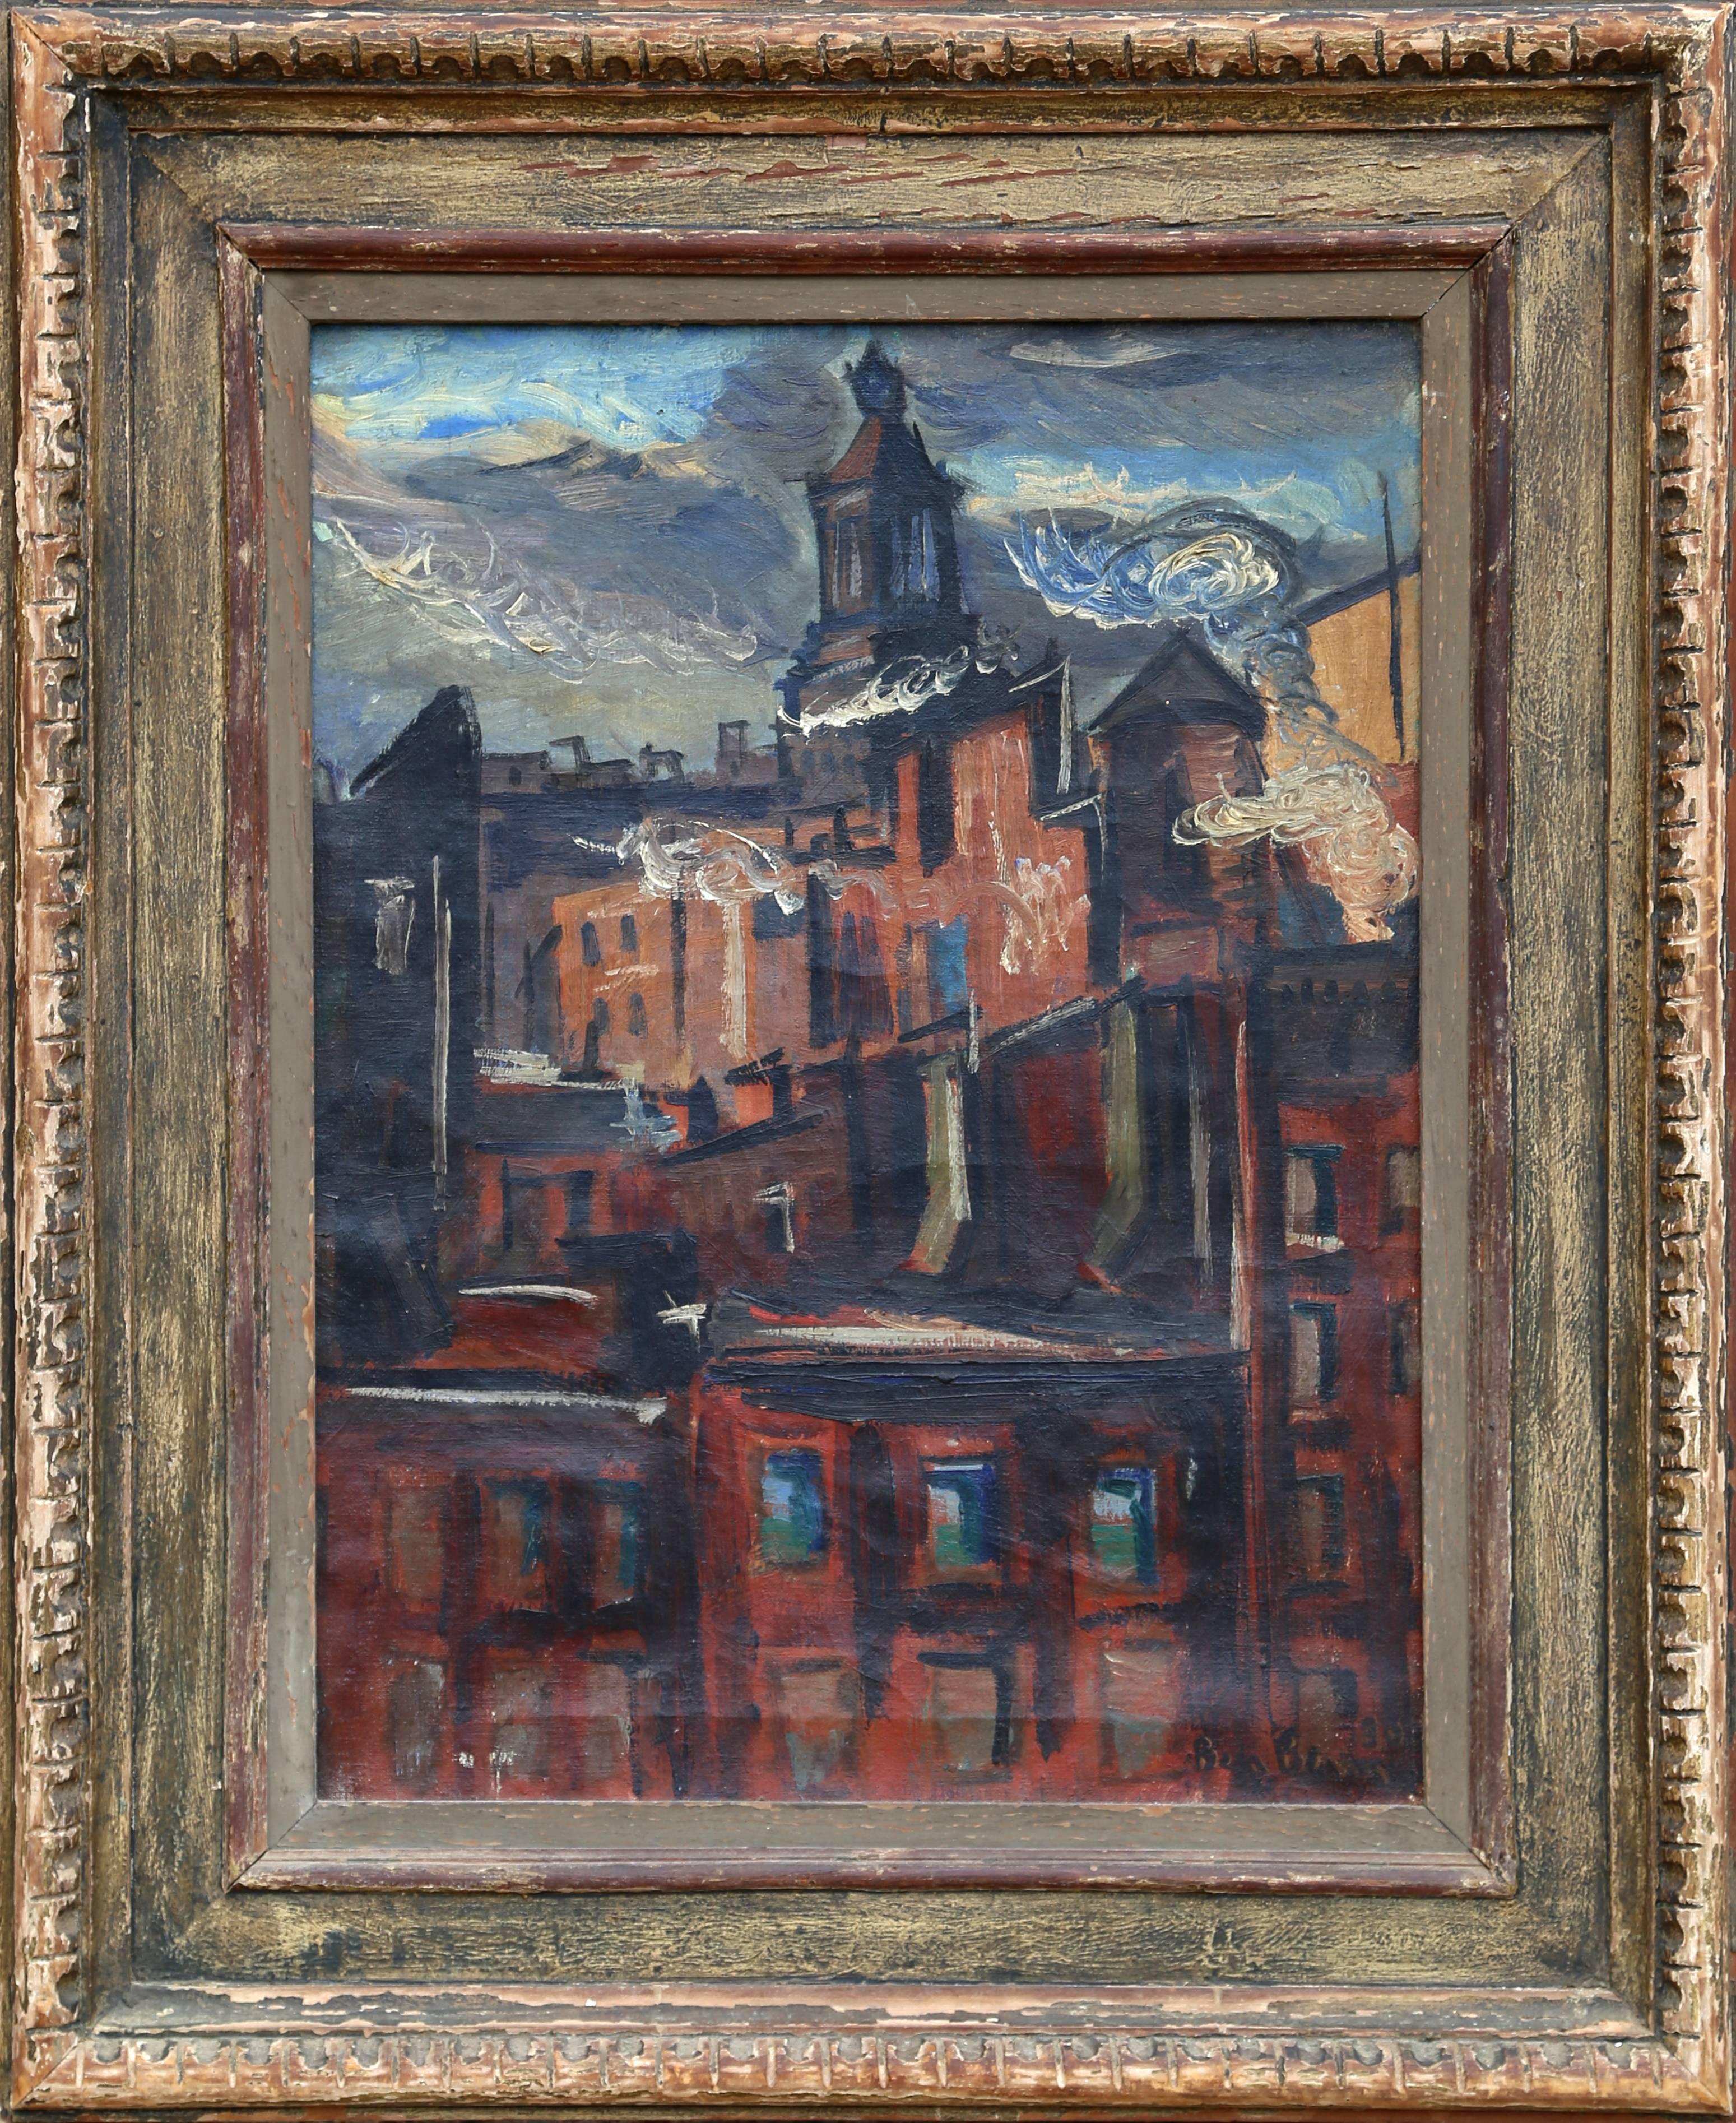 Artist: Ben Benn, Polish/American (1884 - 1983)
Title: Roof Top
Year: circa 1920
Medium: Oil on Canvas, signed l.r.
Size: 24 x 18 in. (60.96 x 45.72 cm)
Frame Size: 33.5 x 27.5 inches

Benn Benn was a pioneer American modernist whose independent